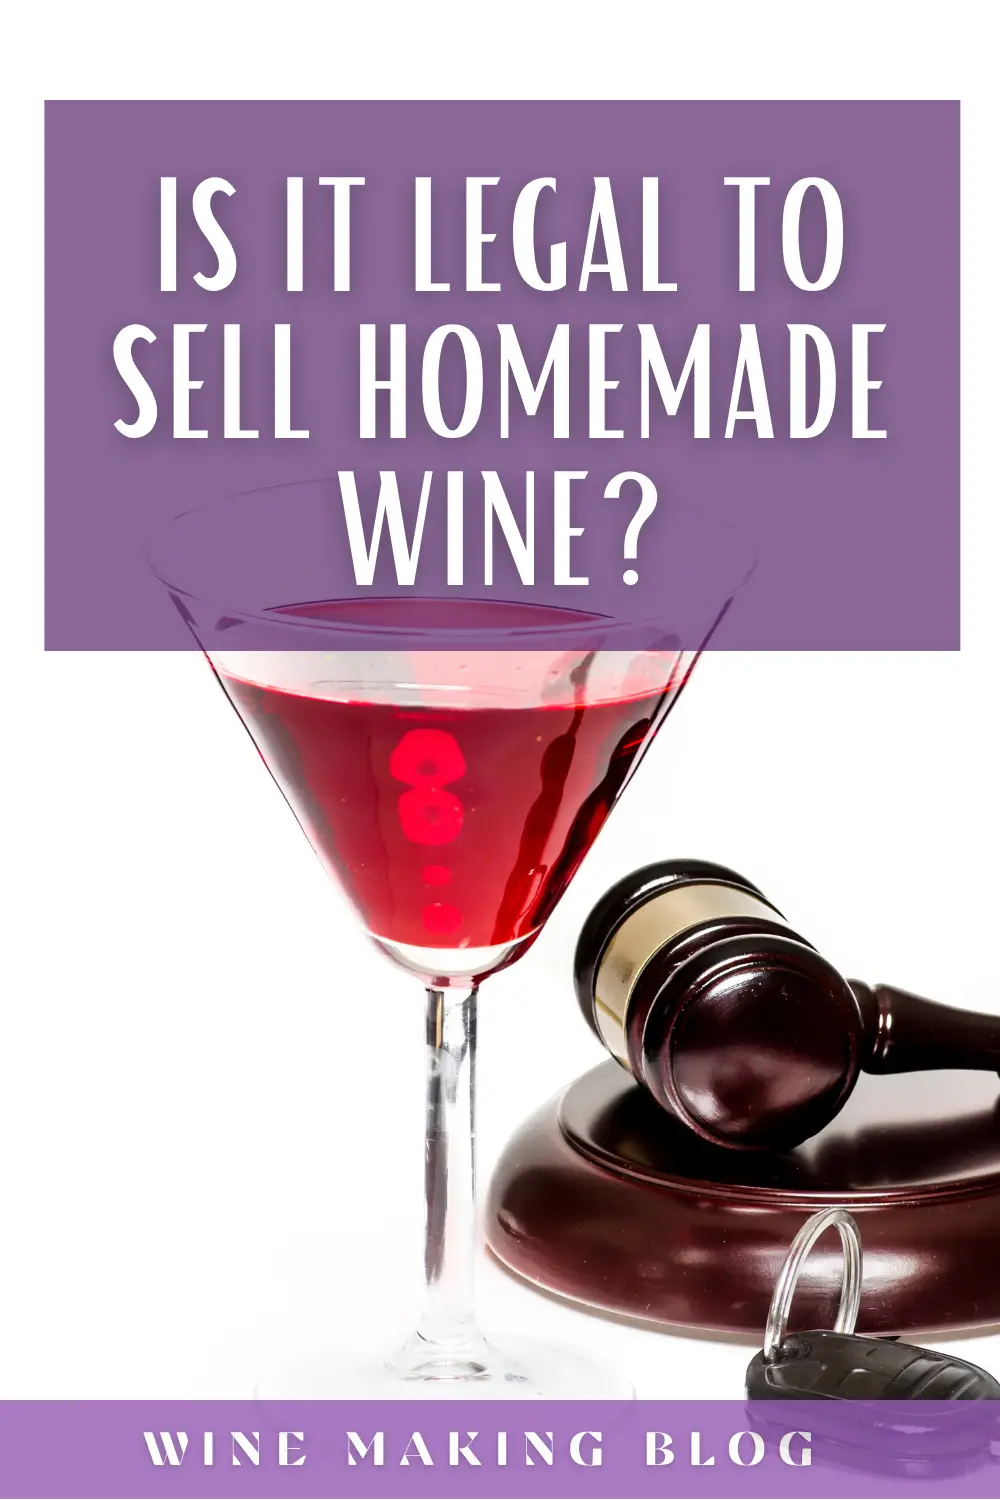 Is it Legal to Make and Sell Homemade Wine? in 2021